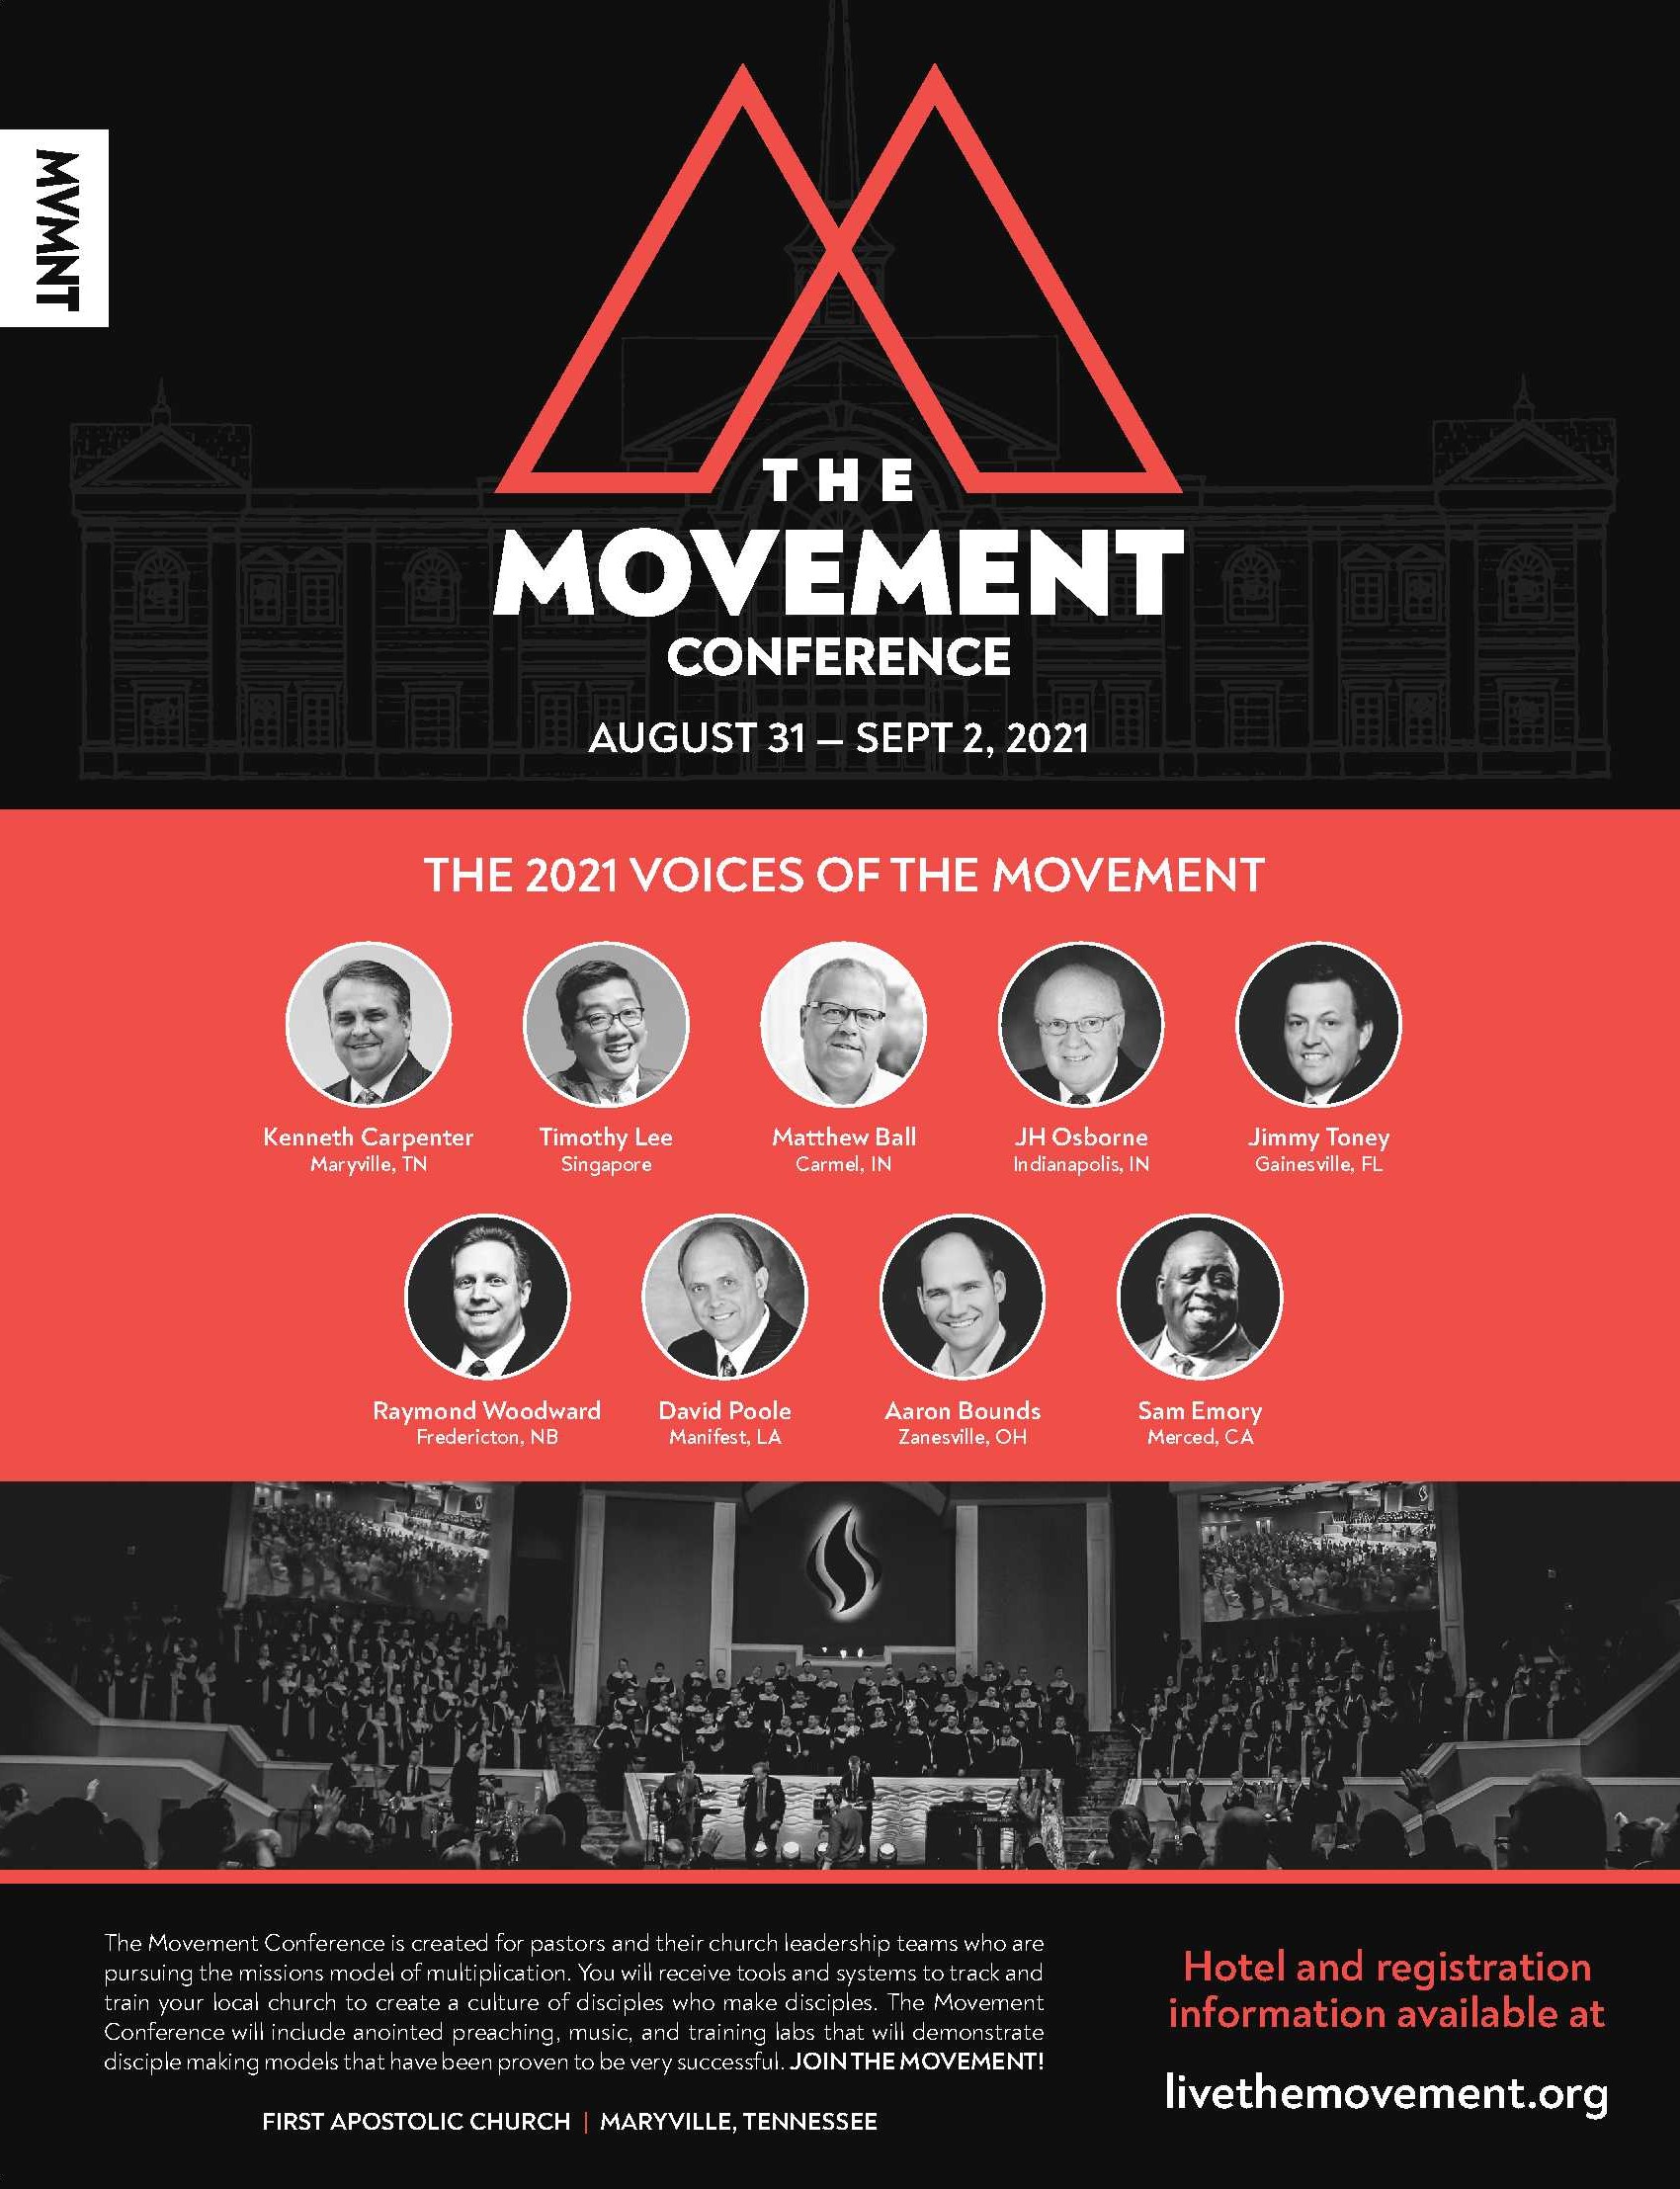 Advertisements - The Movement Conference